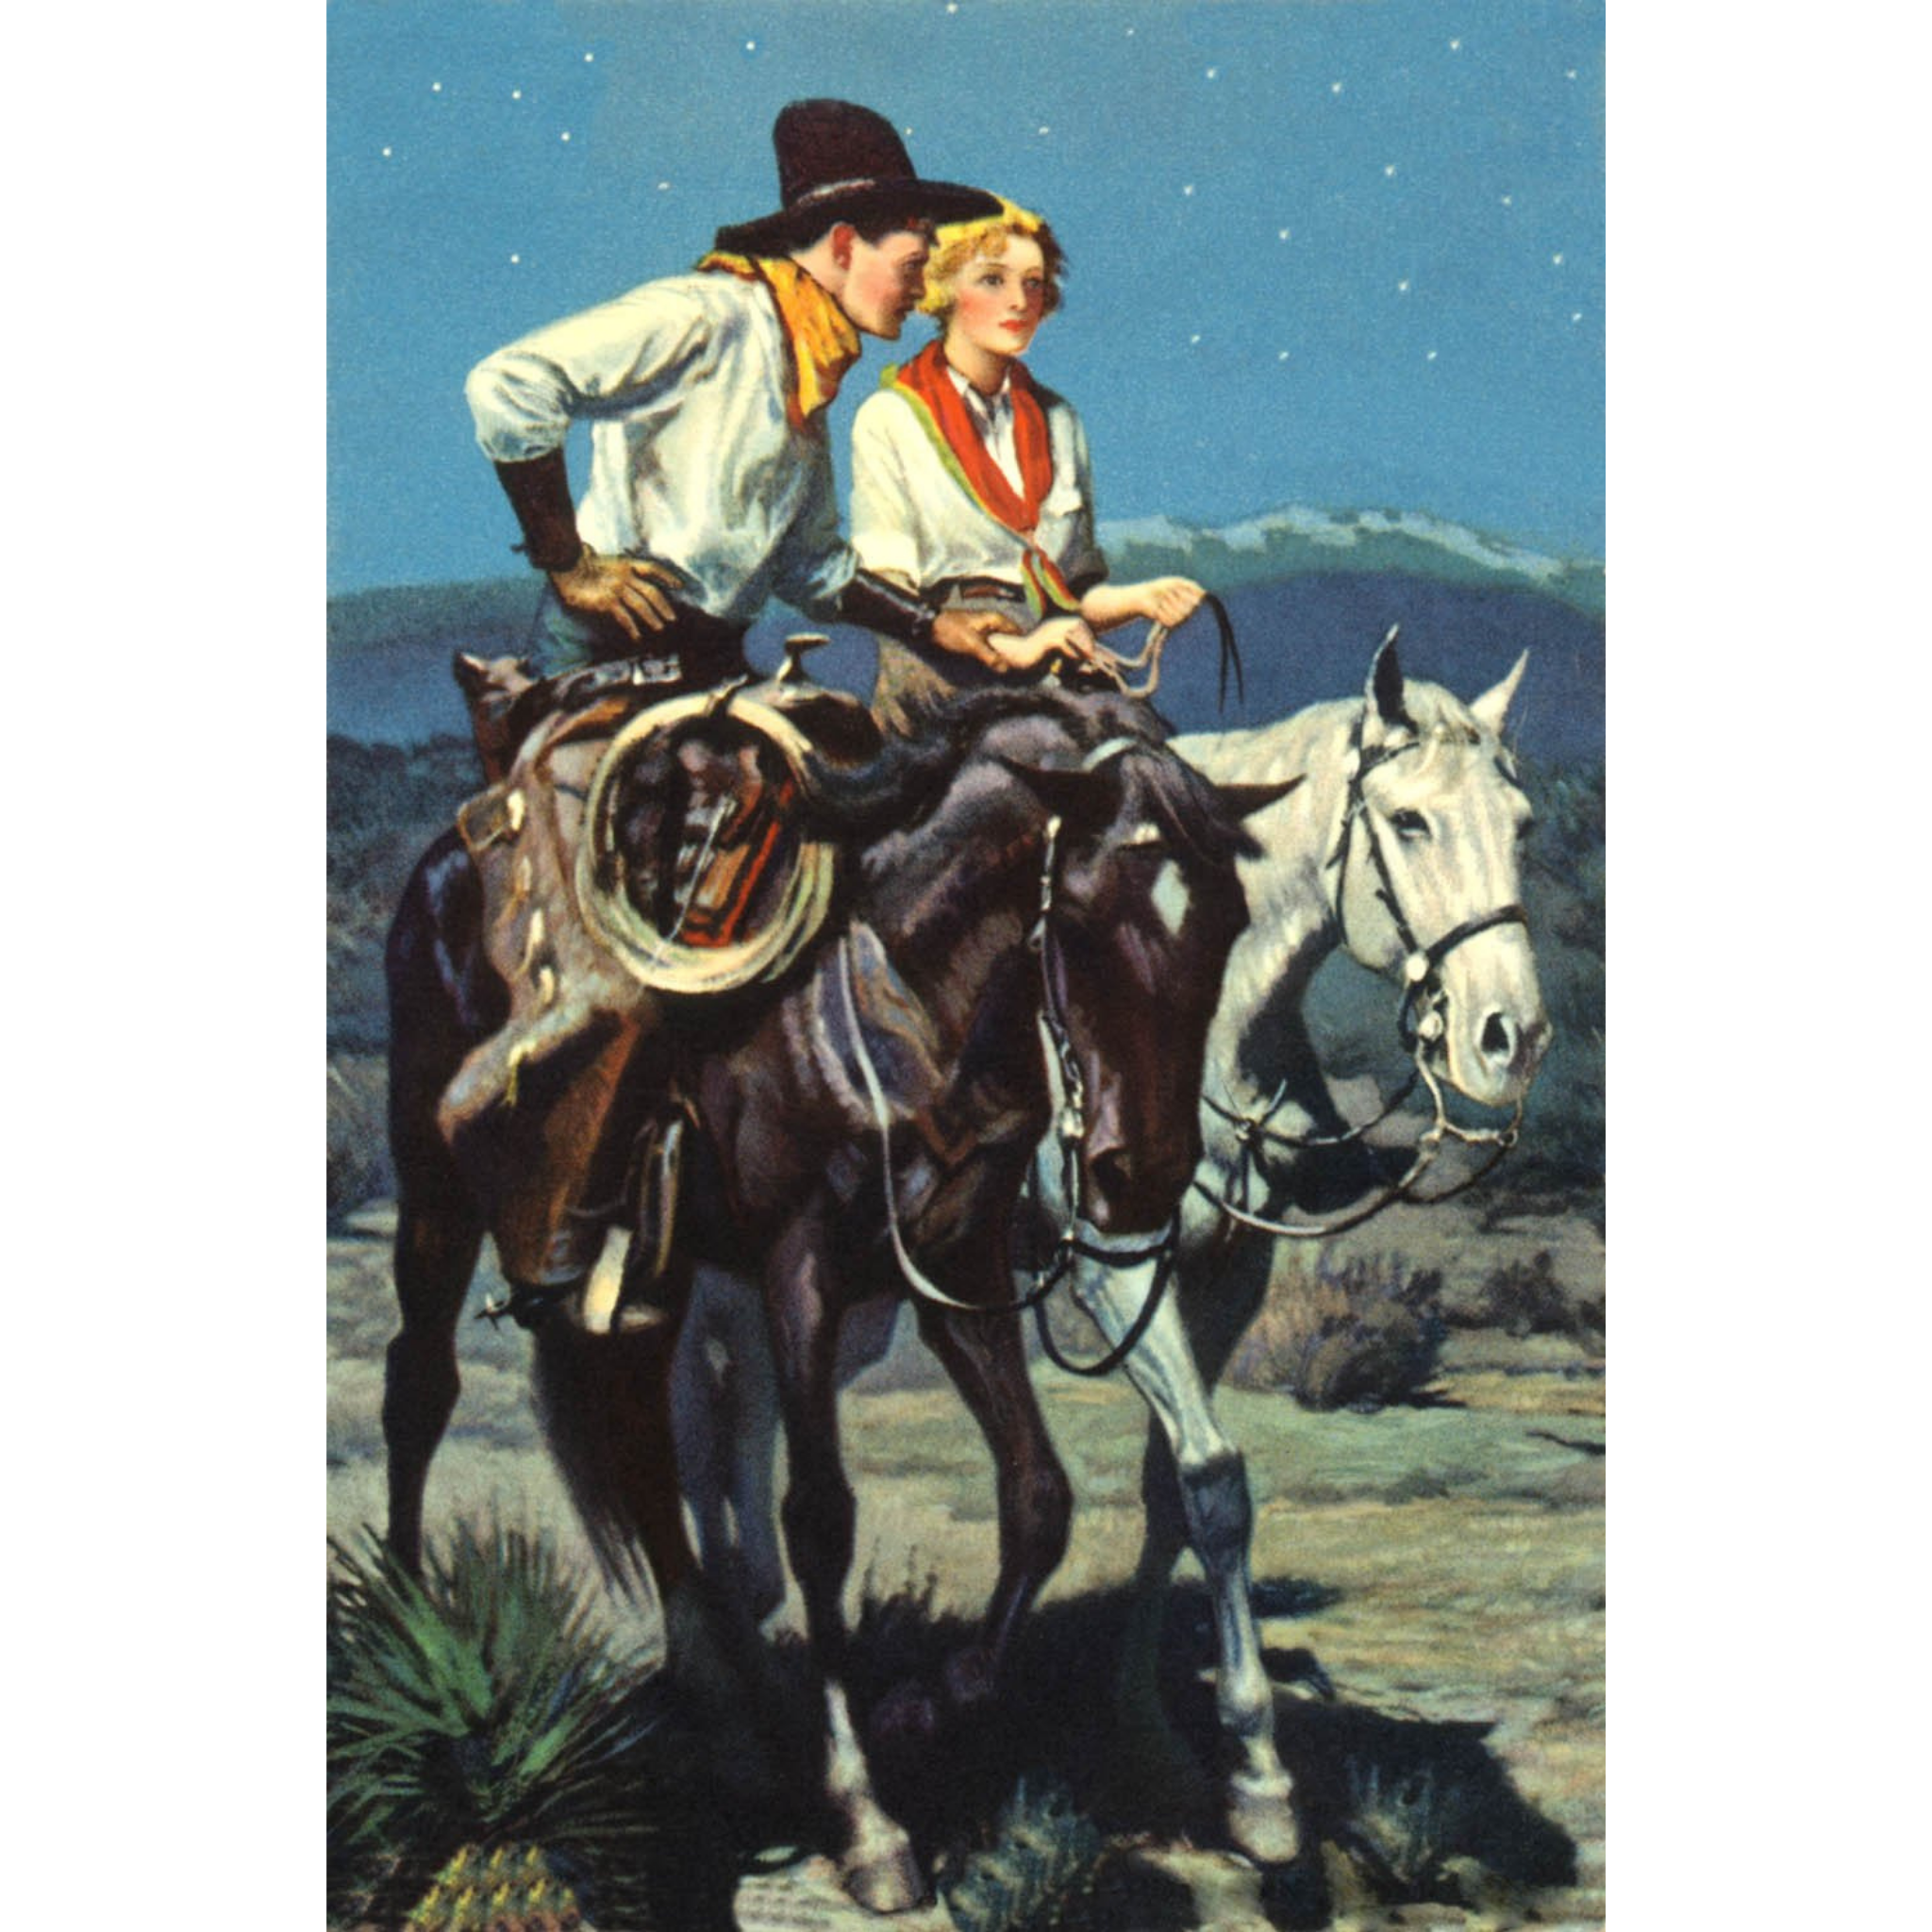 Cowboy and Cowgirl Riding at Night - ca. 1935 Lithograph